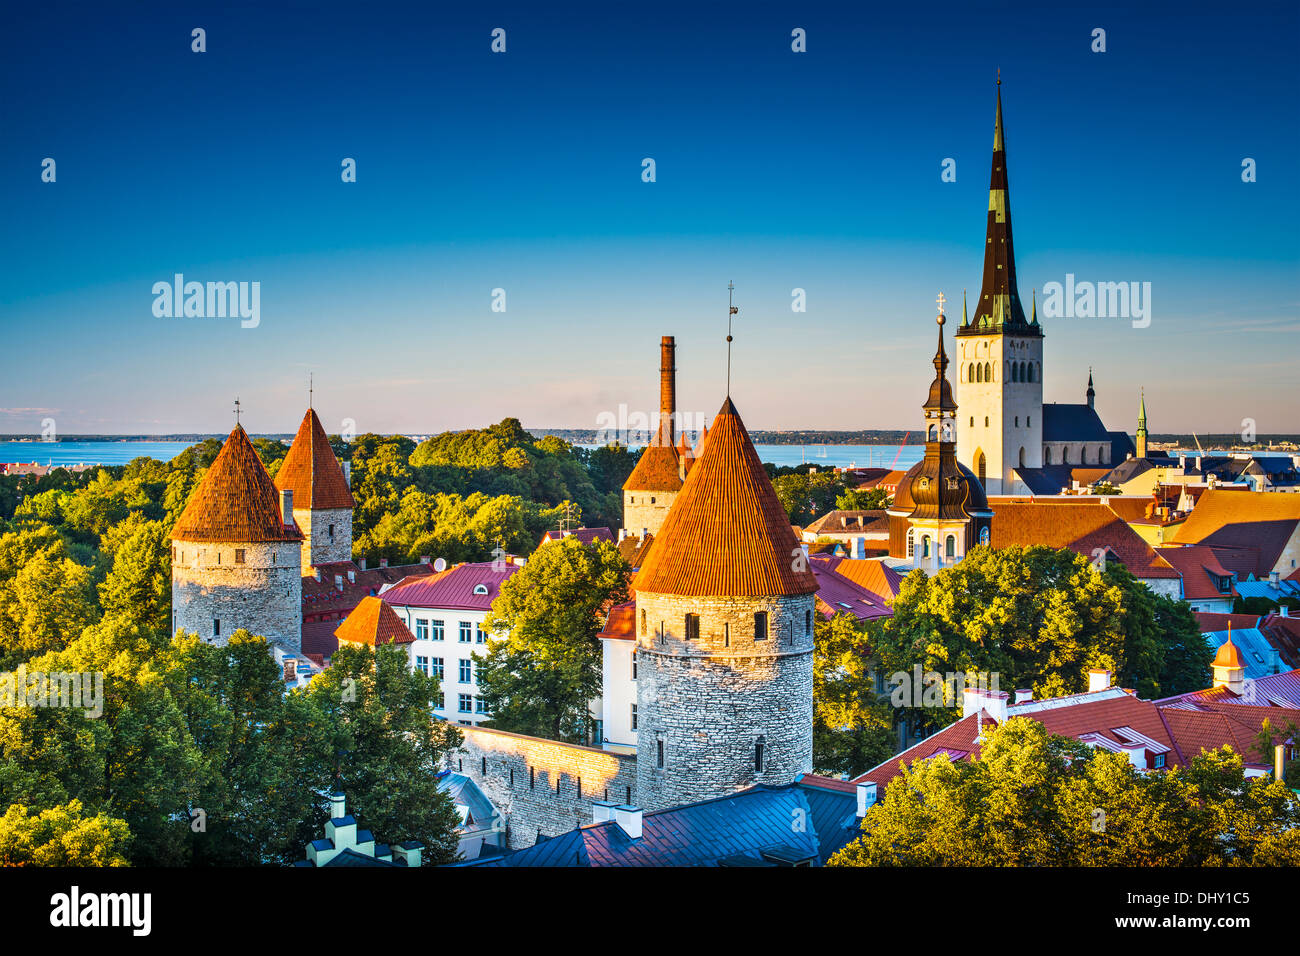 Dawn in Tallinn, Estonia at the old city from Toompea Hill. Stock Photo